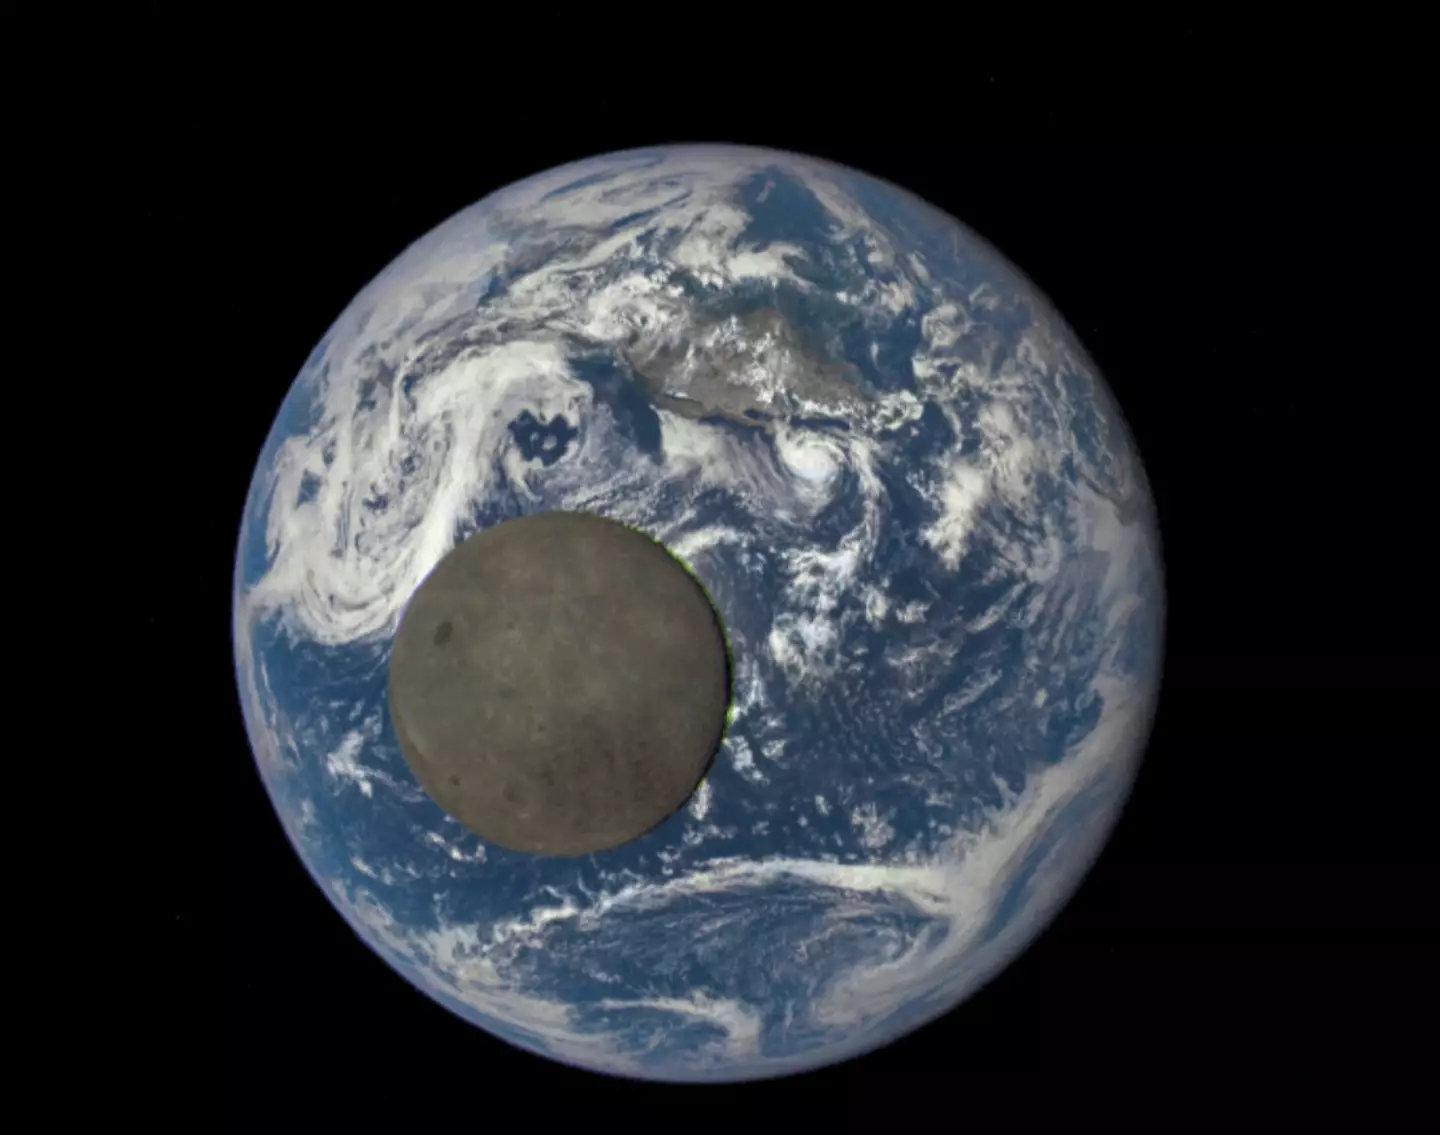 The size of the Earth compared to our moon.